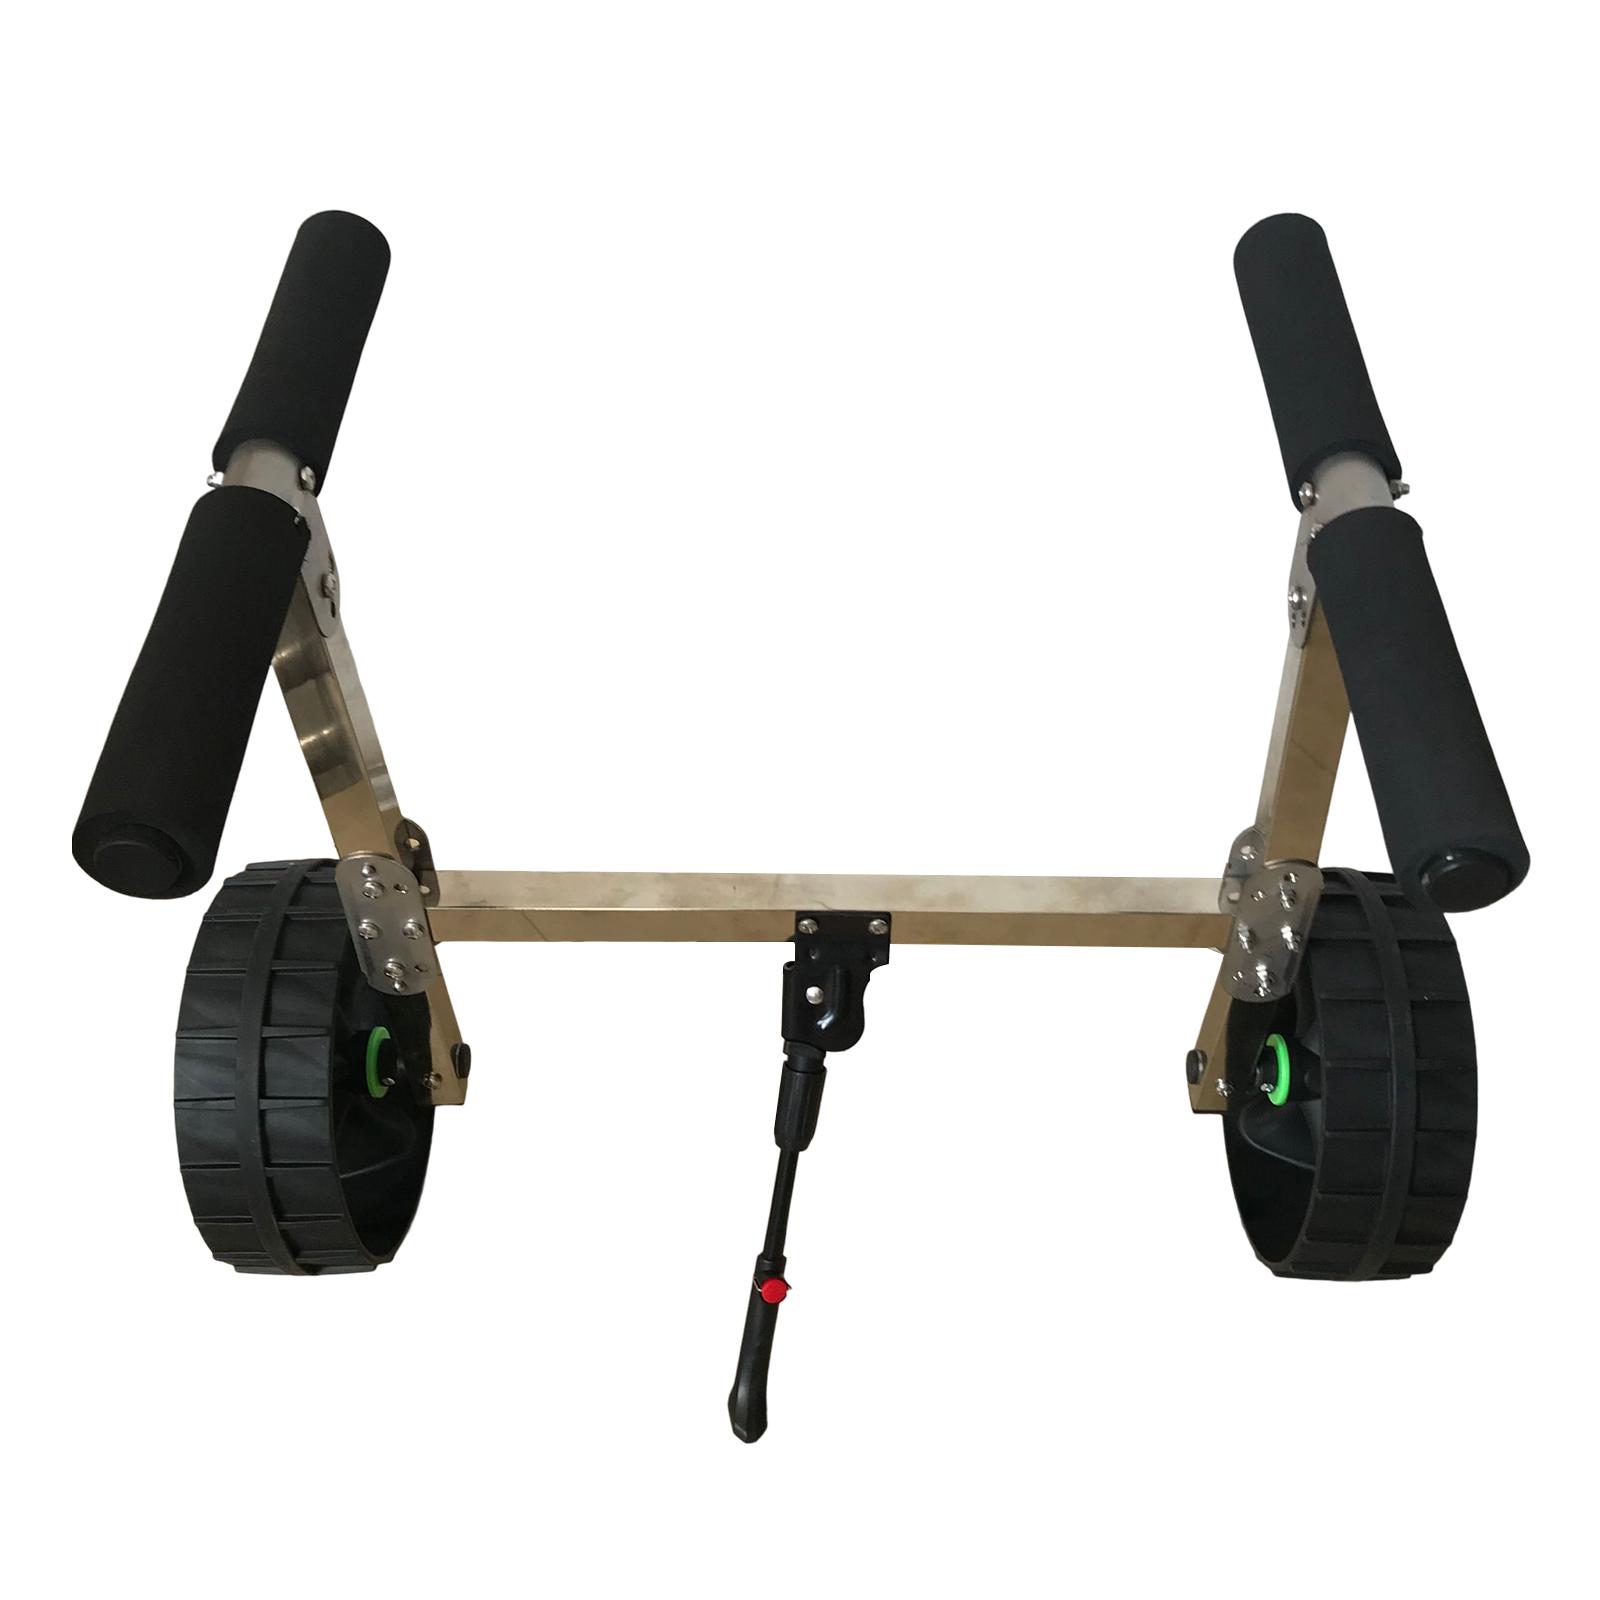 Kayak Wheels Trolley Folding with Support Stand Hauler Canoe Dolly Kayak Carrier